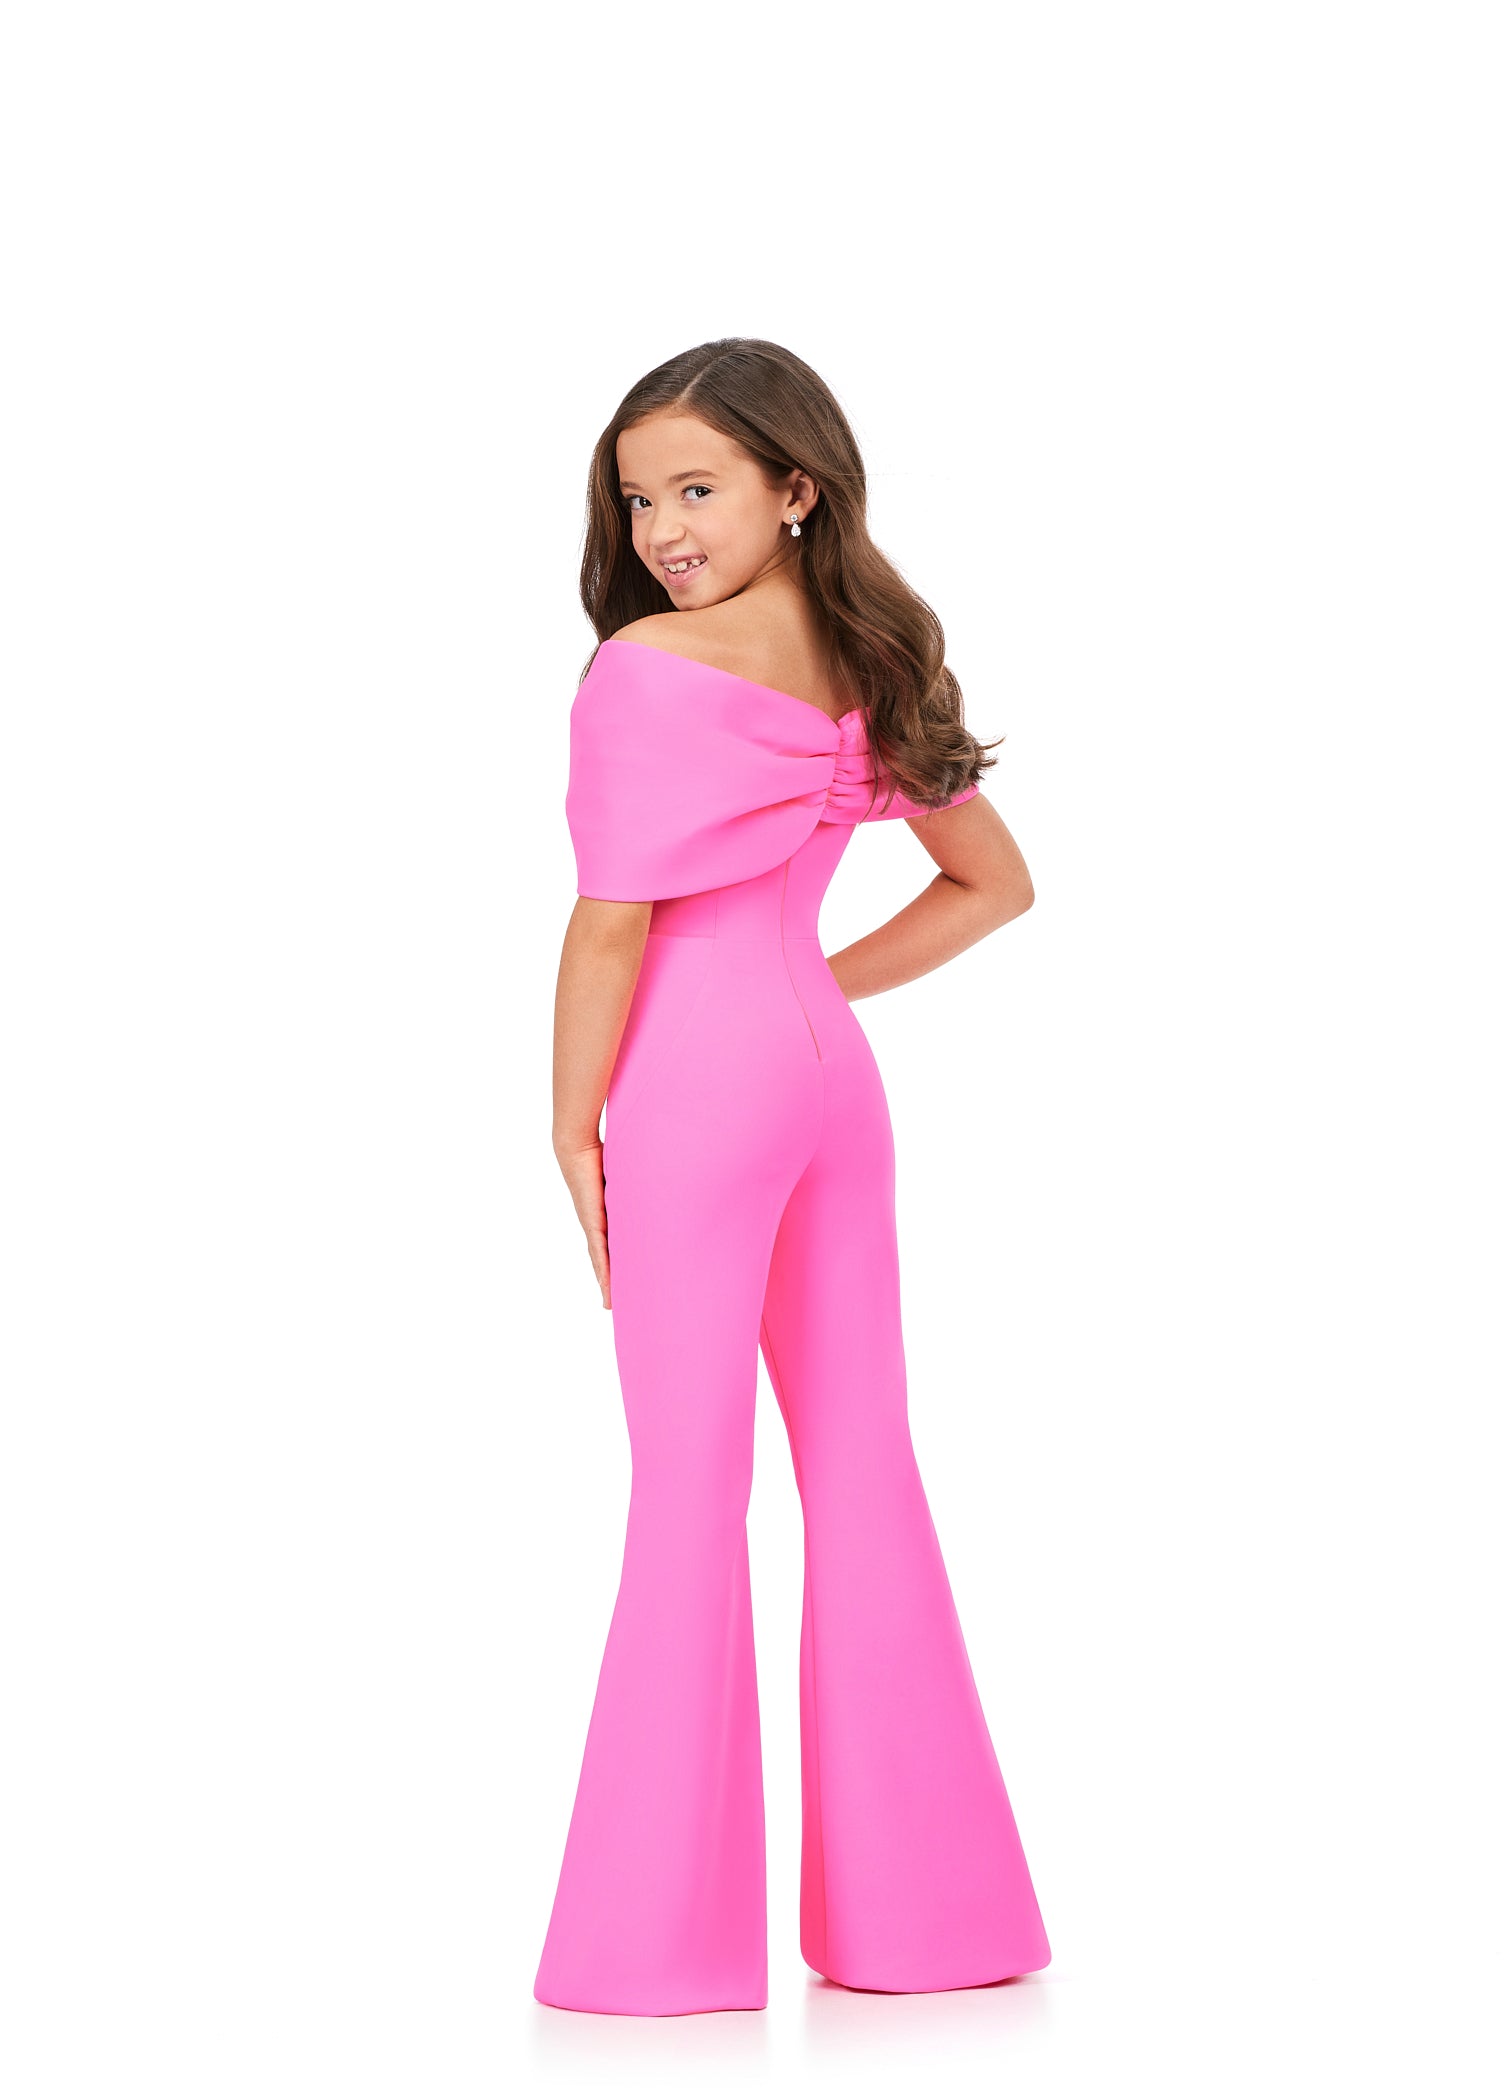 She'll be the talk of the town in the Ashley Lauren Kids 8227 Jumpsuit. Crafted from scuba material, this fashionable design features an off-shoulder bodice with an oversized bow and flare pant legs for a modern touch. Perfect for any special occasion.  Sizes: 4-16  Colors: Red, Hot Pink, Turquoise, White/Black